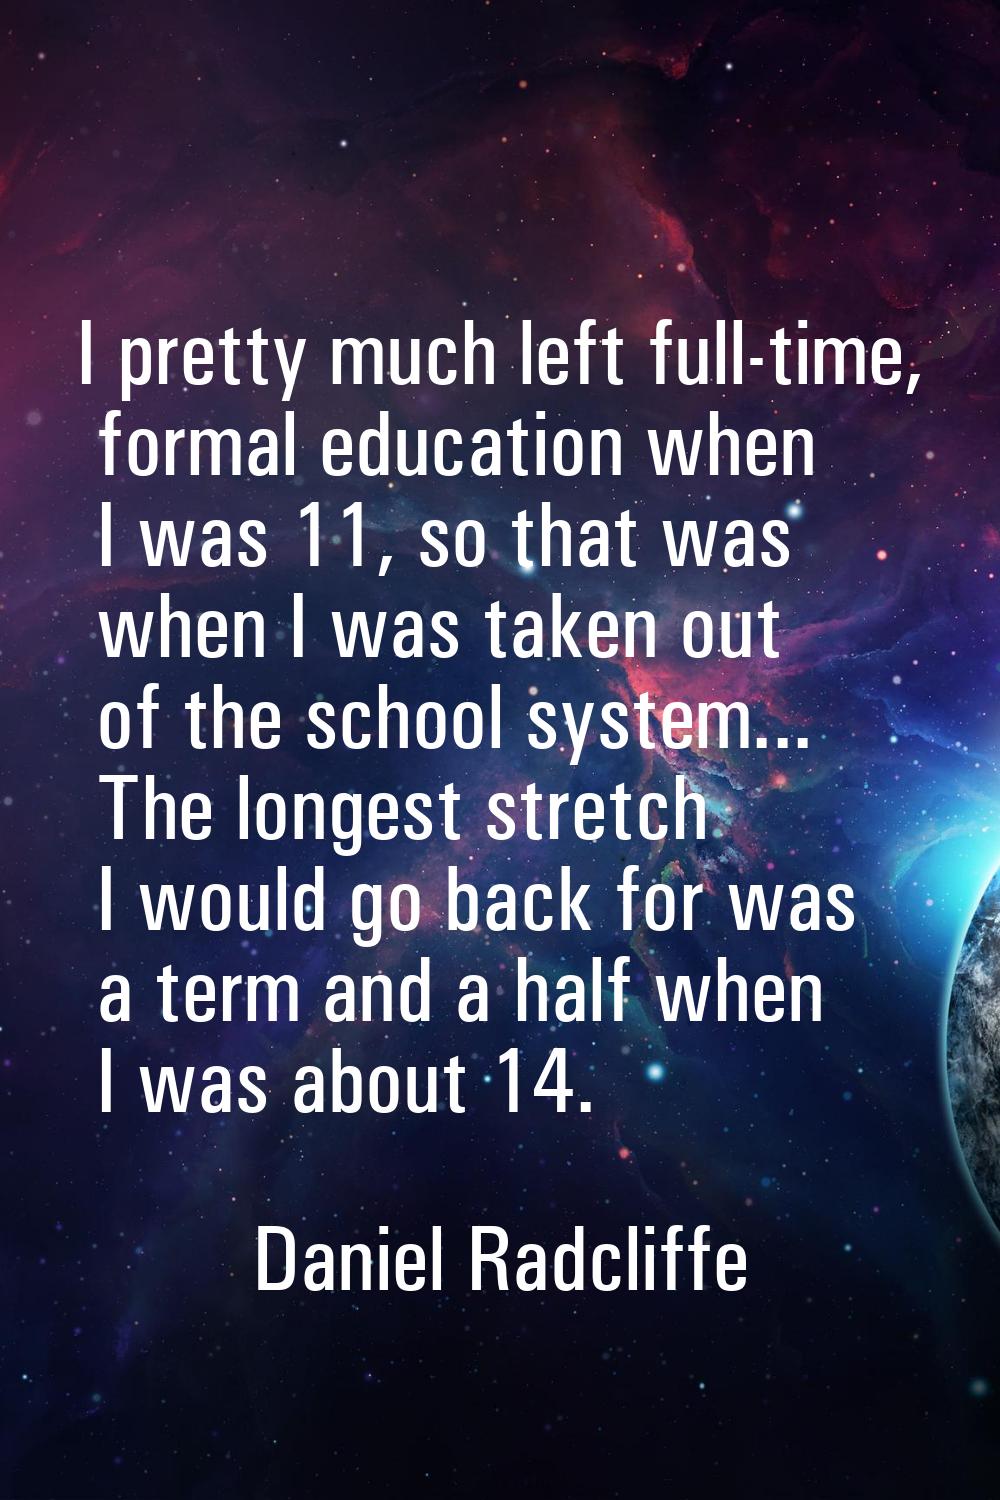 I pretty much left full-time, formal education when I was 11, so that was when I was taken out of t